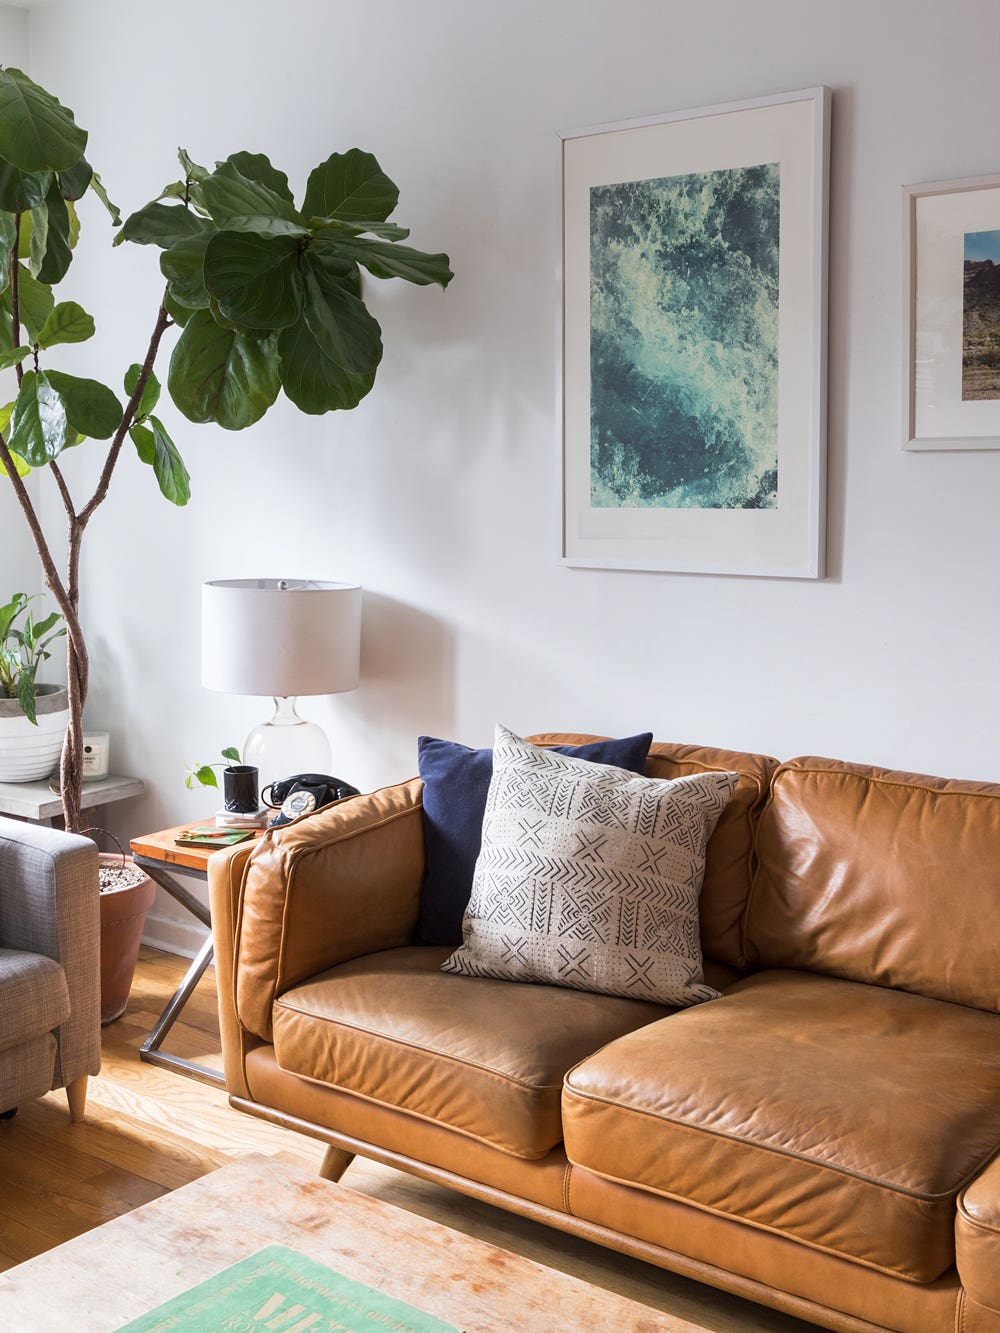 This Bachelor Pad Staple Is Finally Getting a Makeover